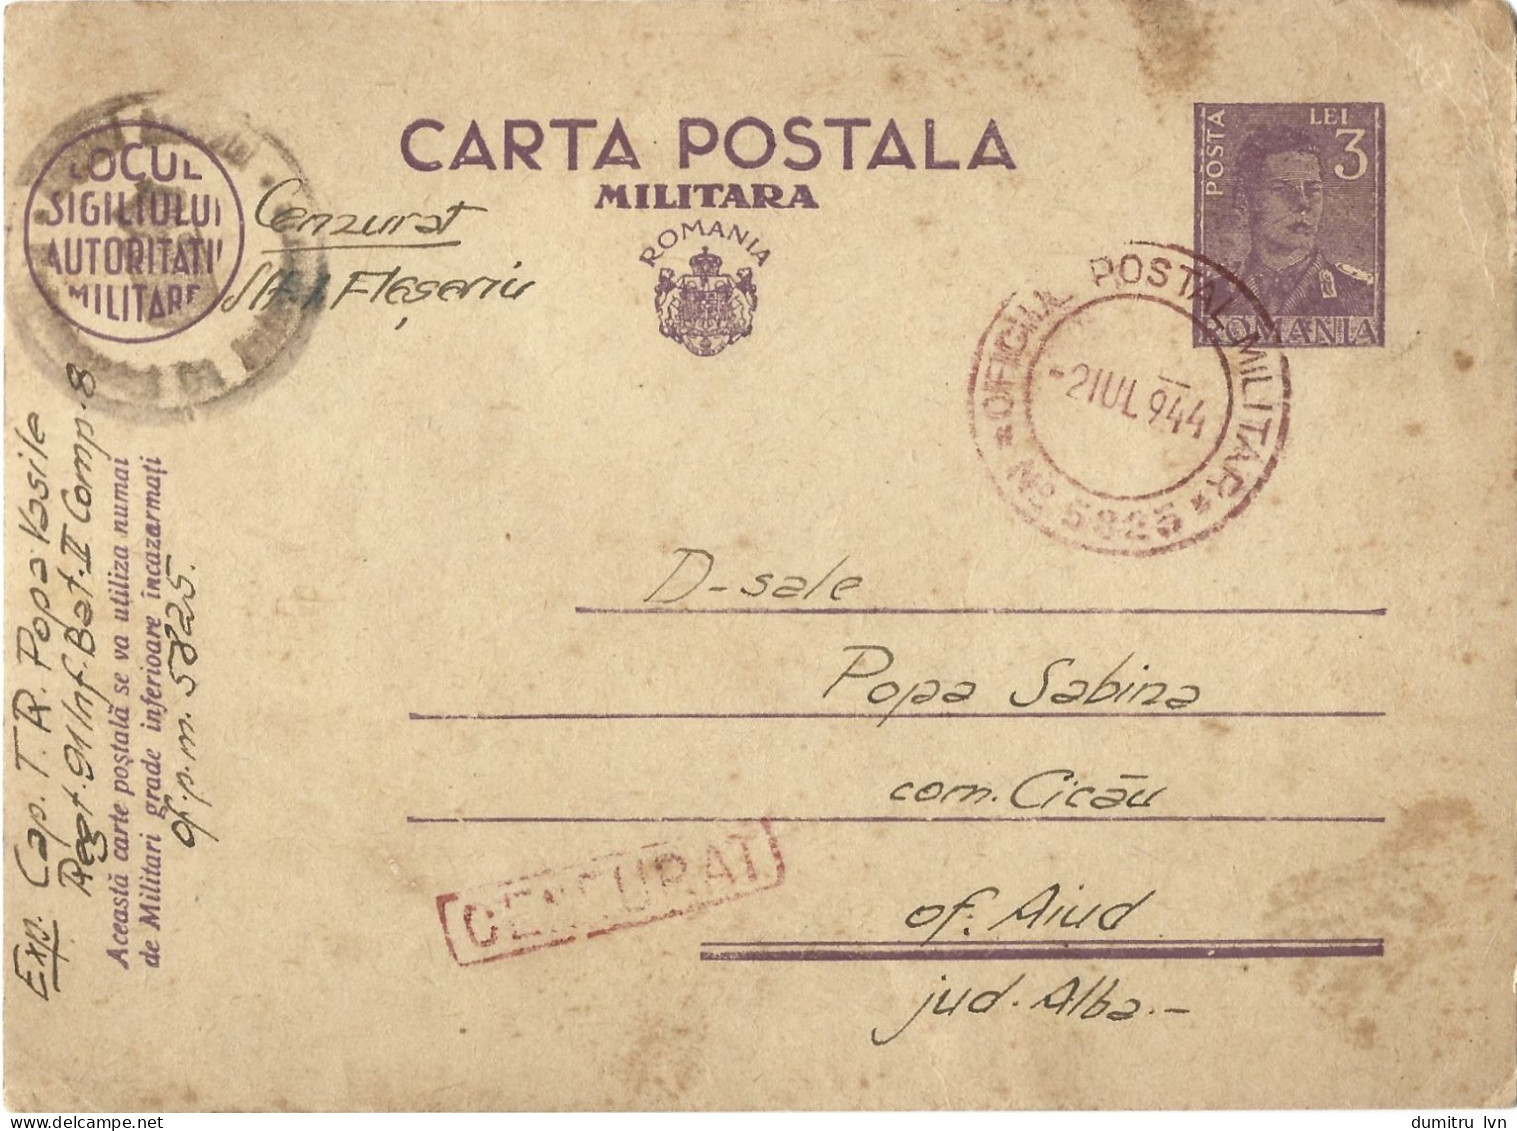 ROMANIA 1944 MILITARY POSTCARD, MILITARY CENSORED, OPM 5825, POSTCARD STATIONERY - World War 2 Letters